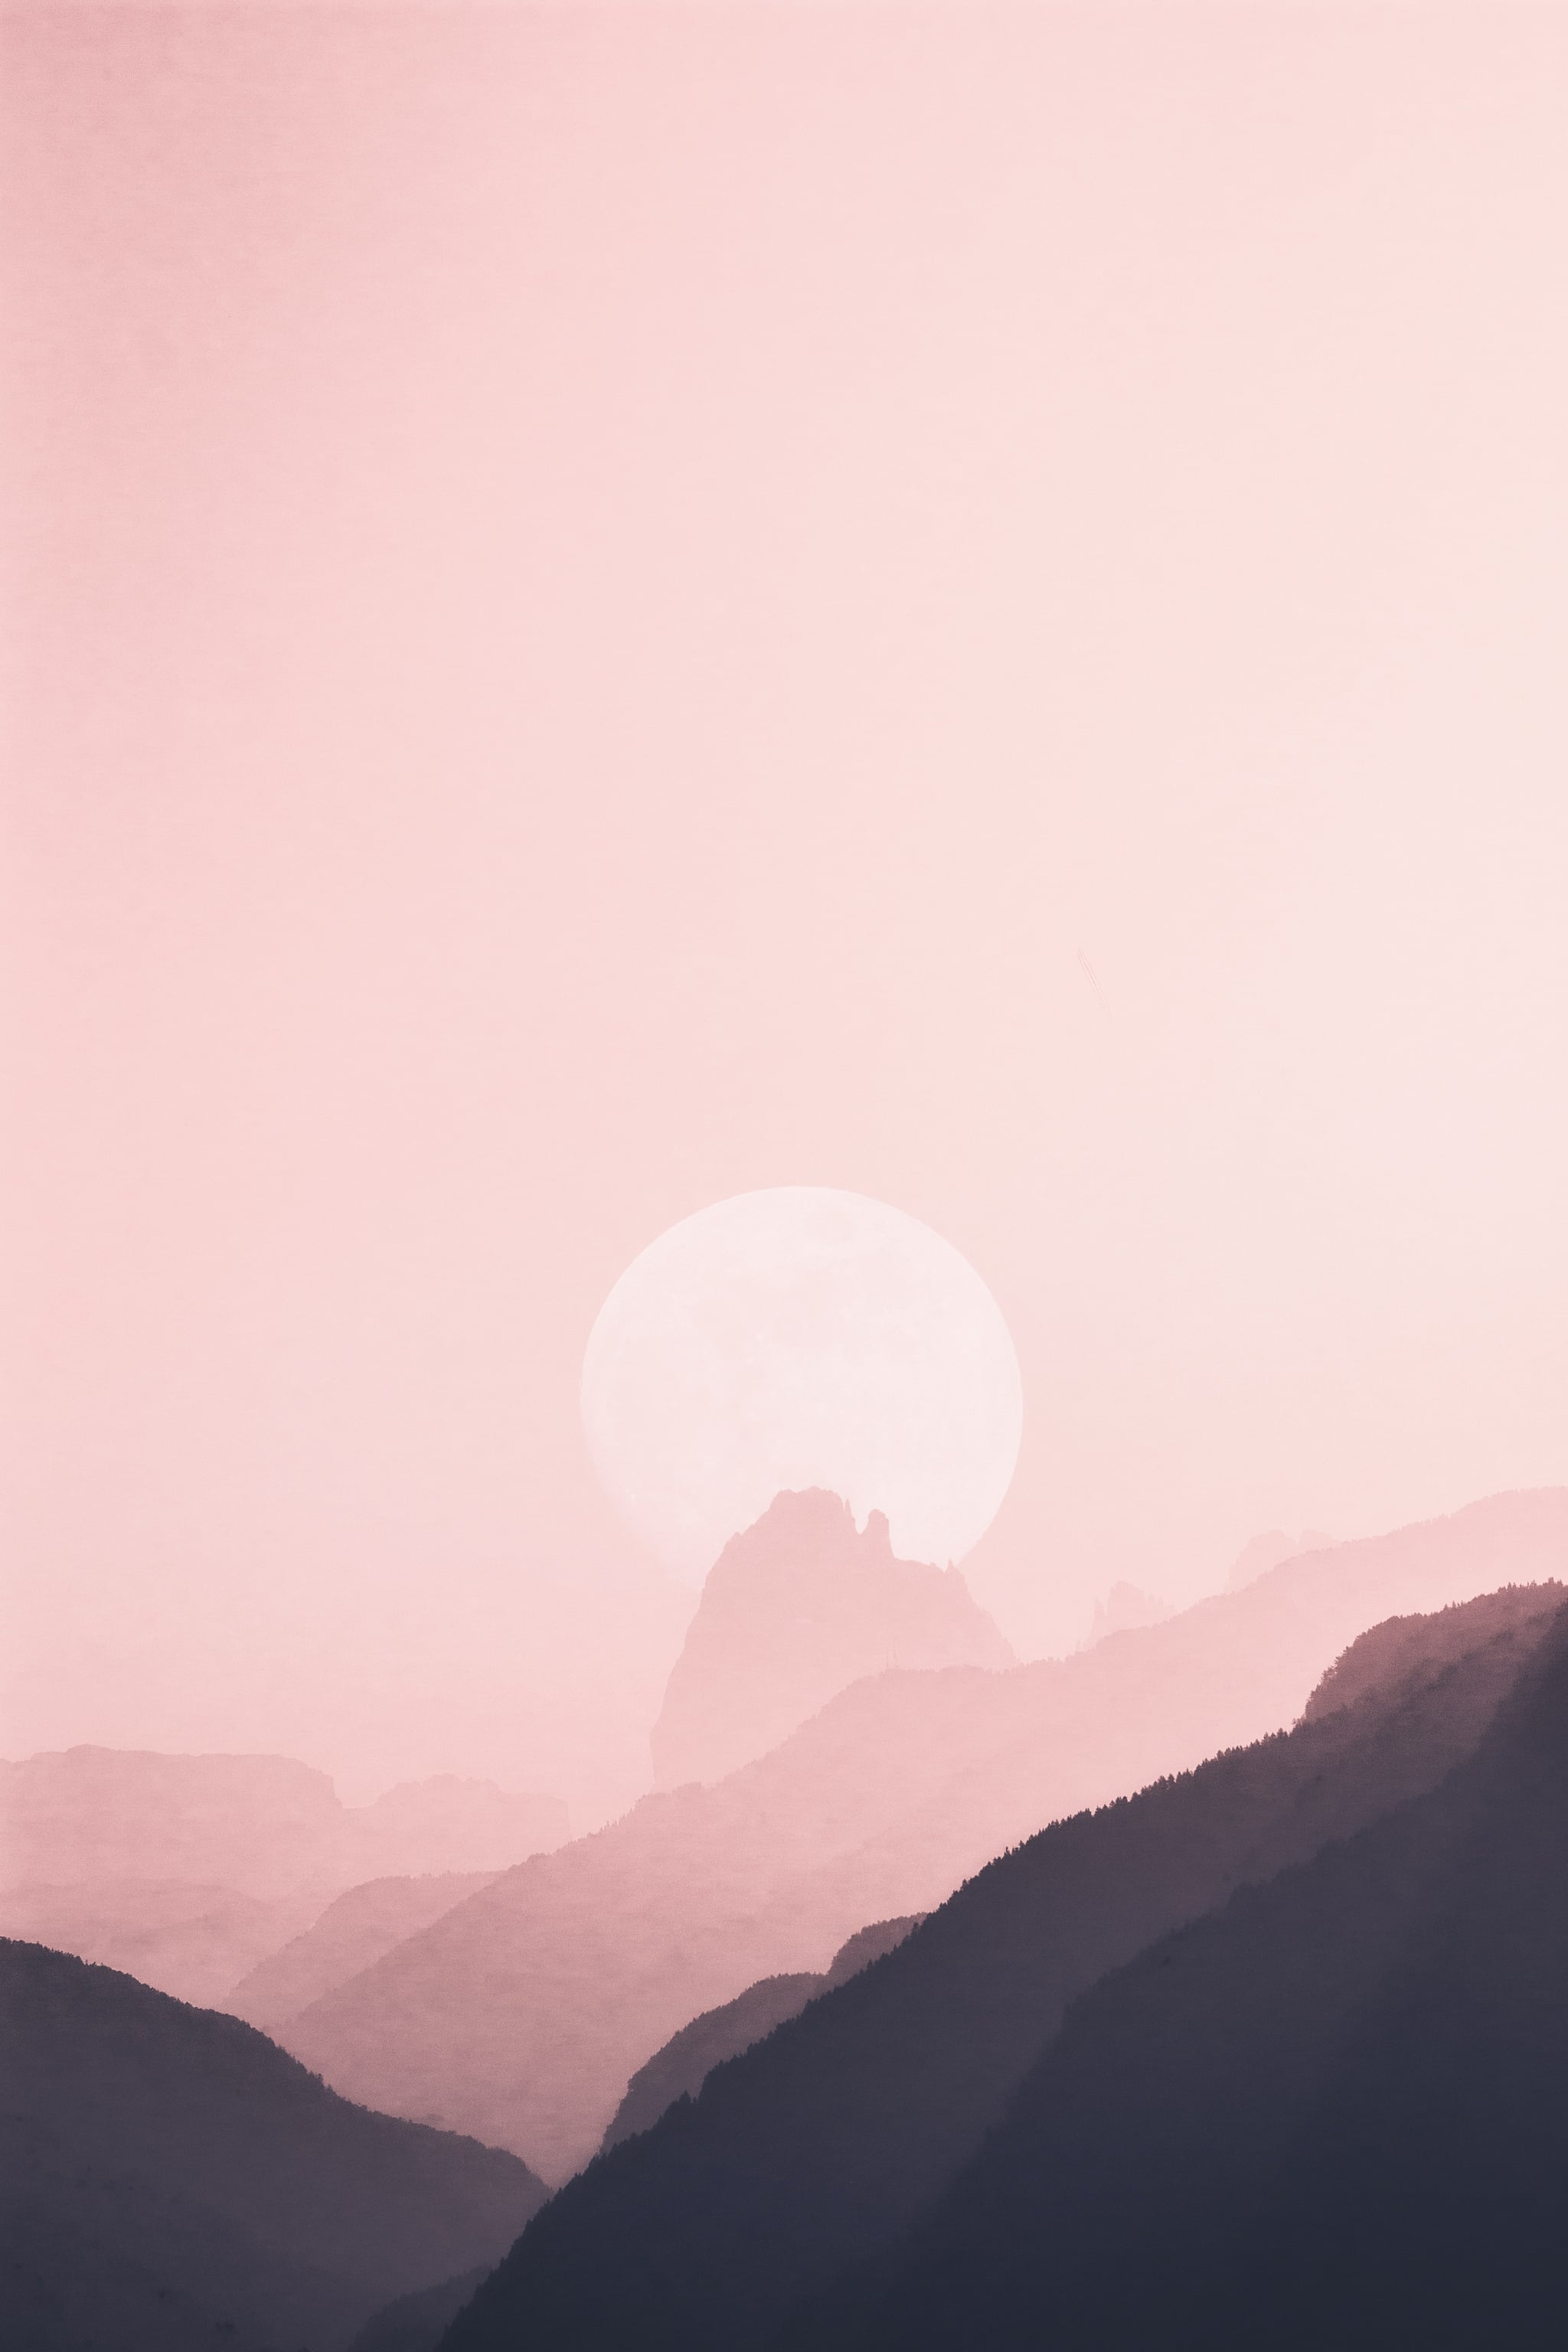 A pink and purple image of a mountain range with a full moon - Mountain, minimalist, neutral, modern, sky, sunrise, boho, couple, simple, warm, cool